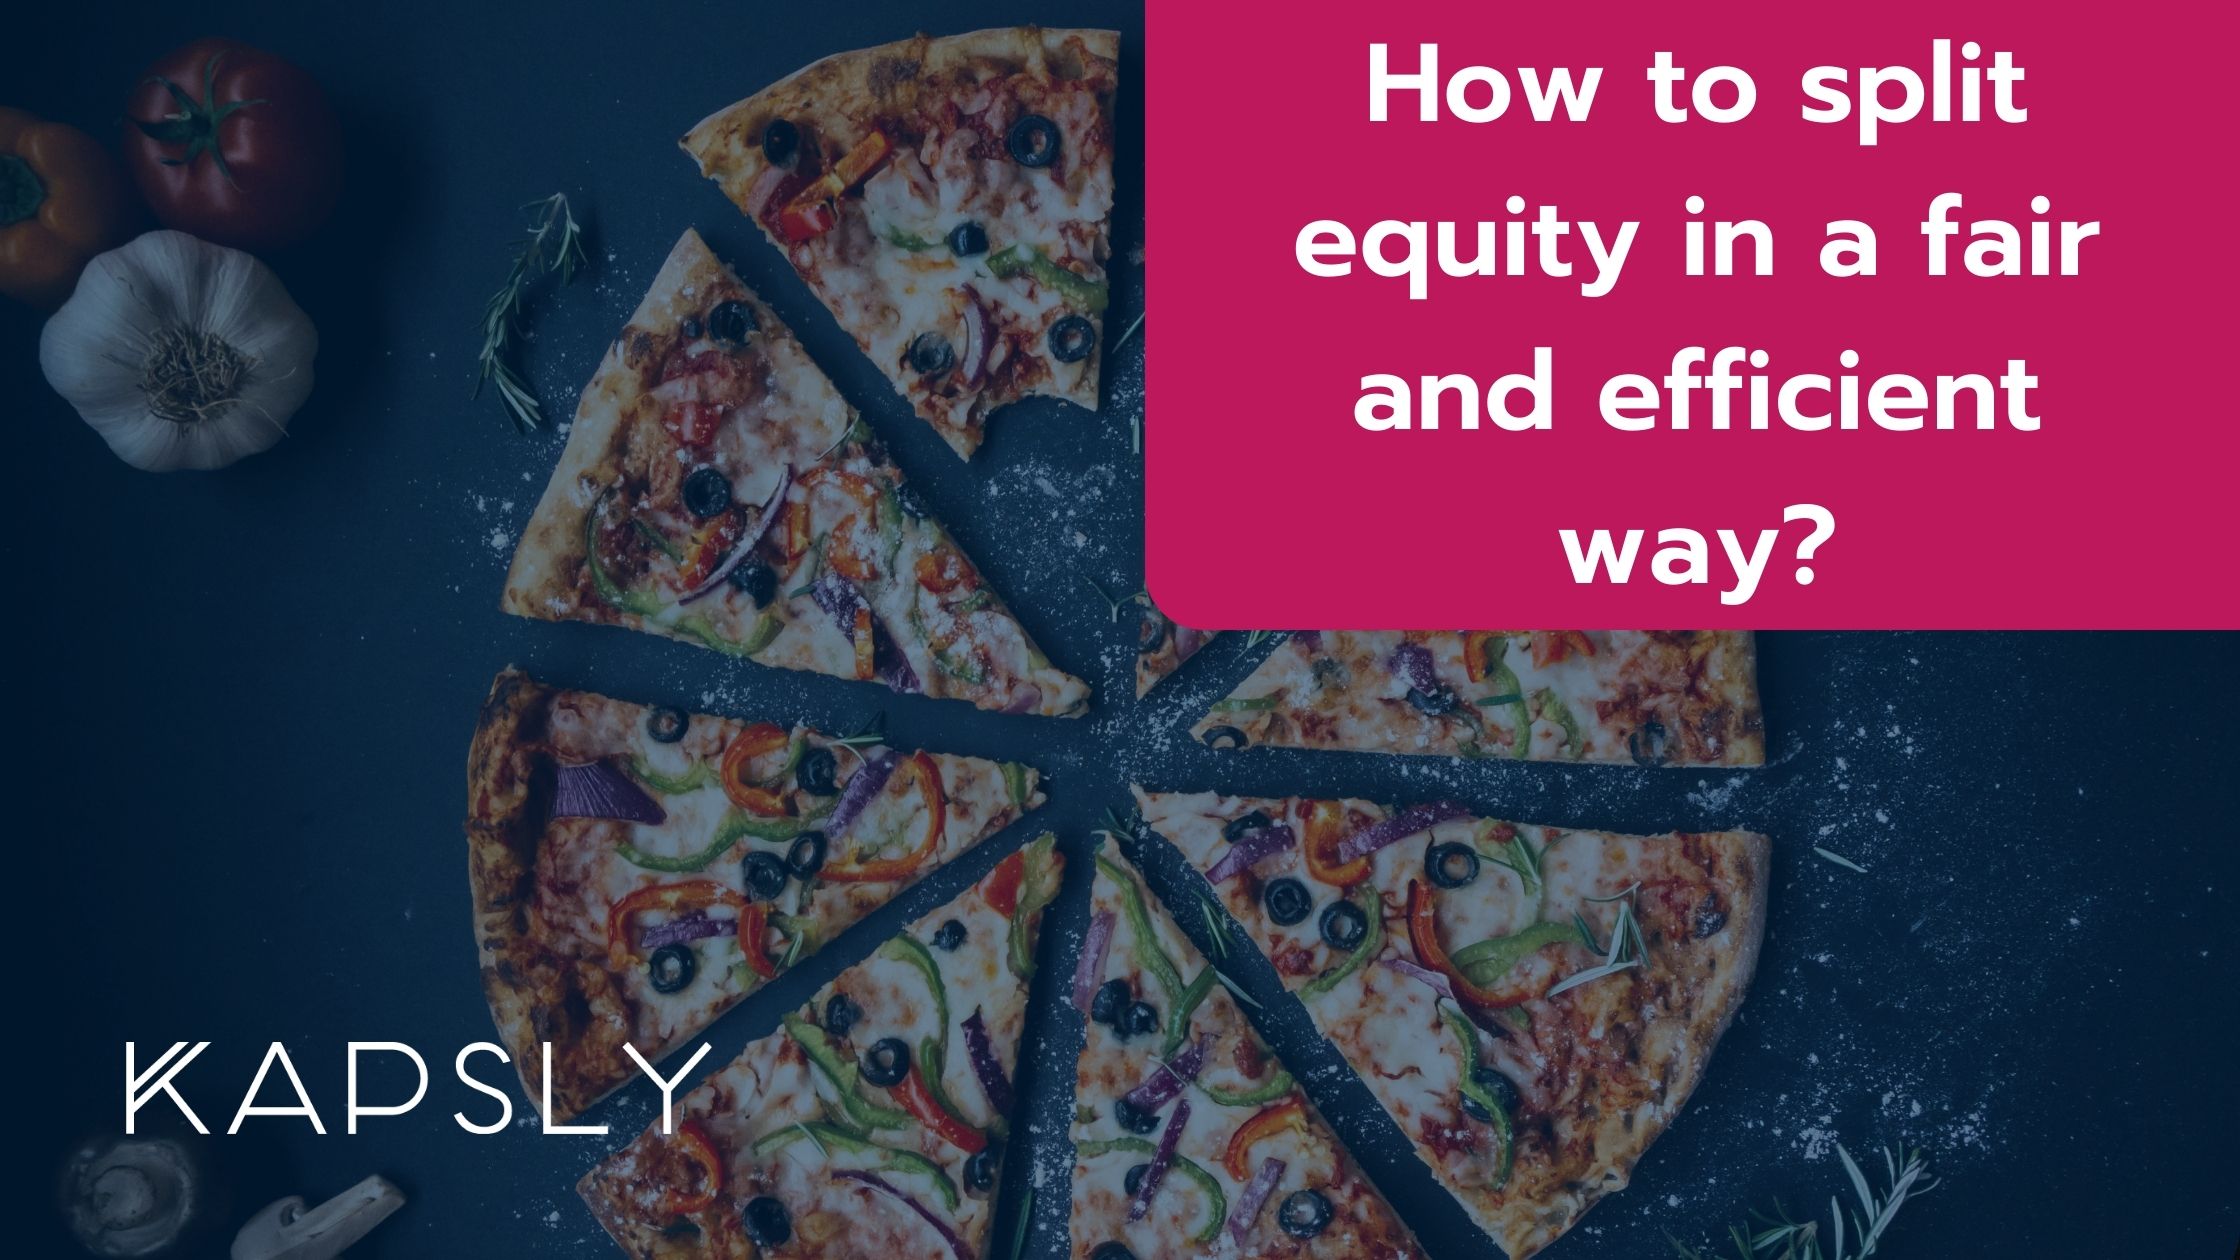 How to split equity in a fair and efficient way?